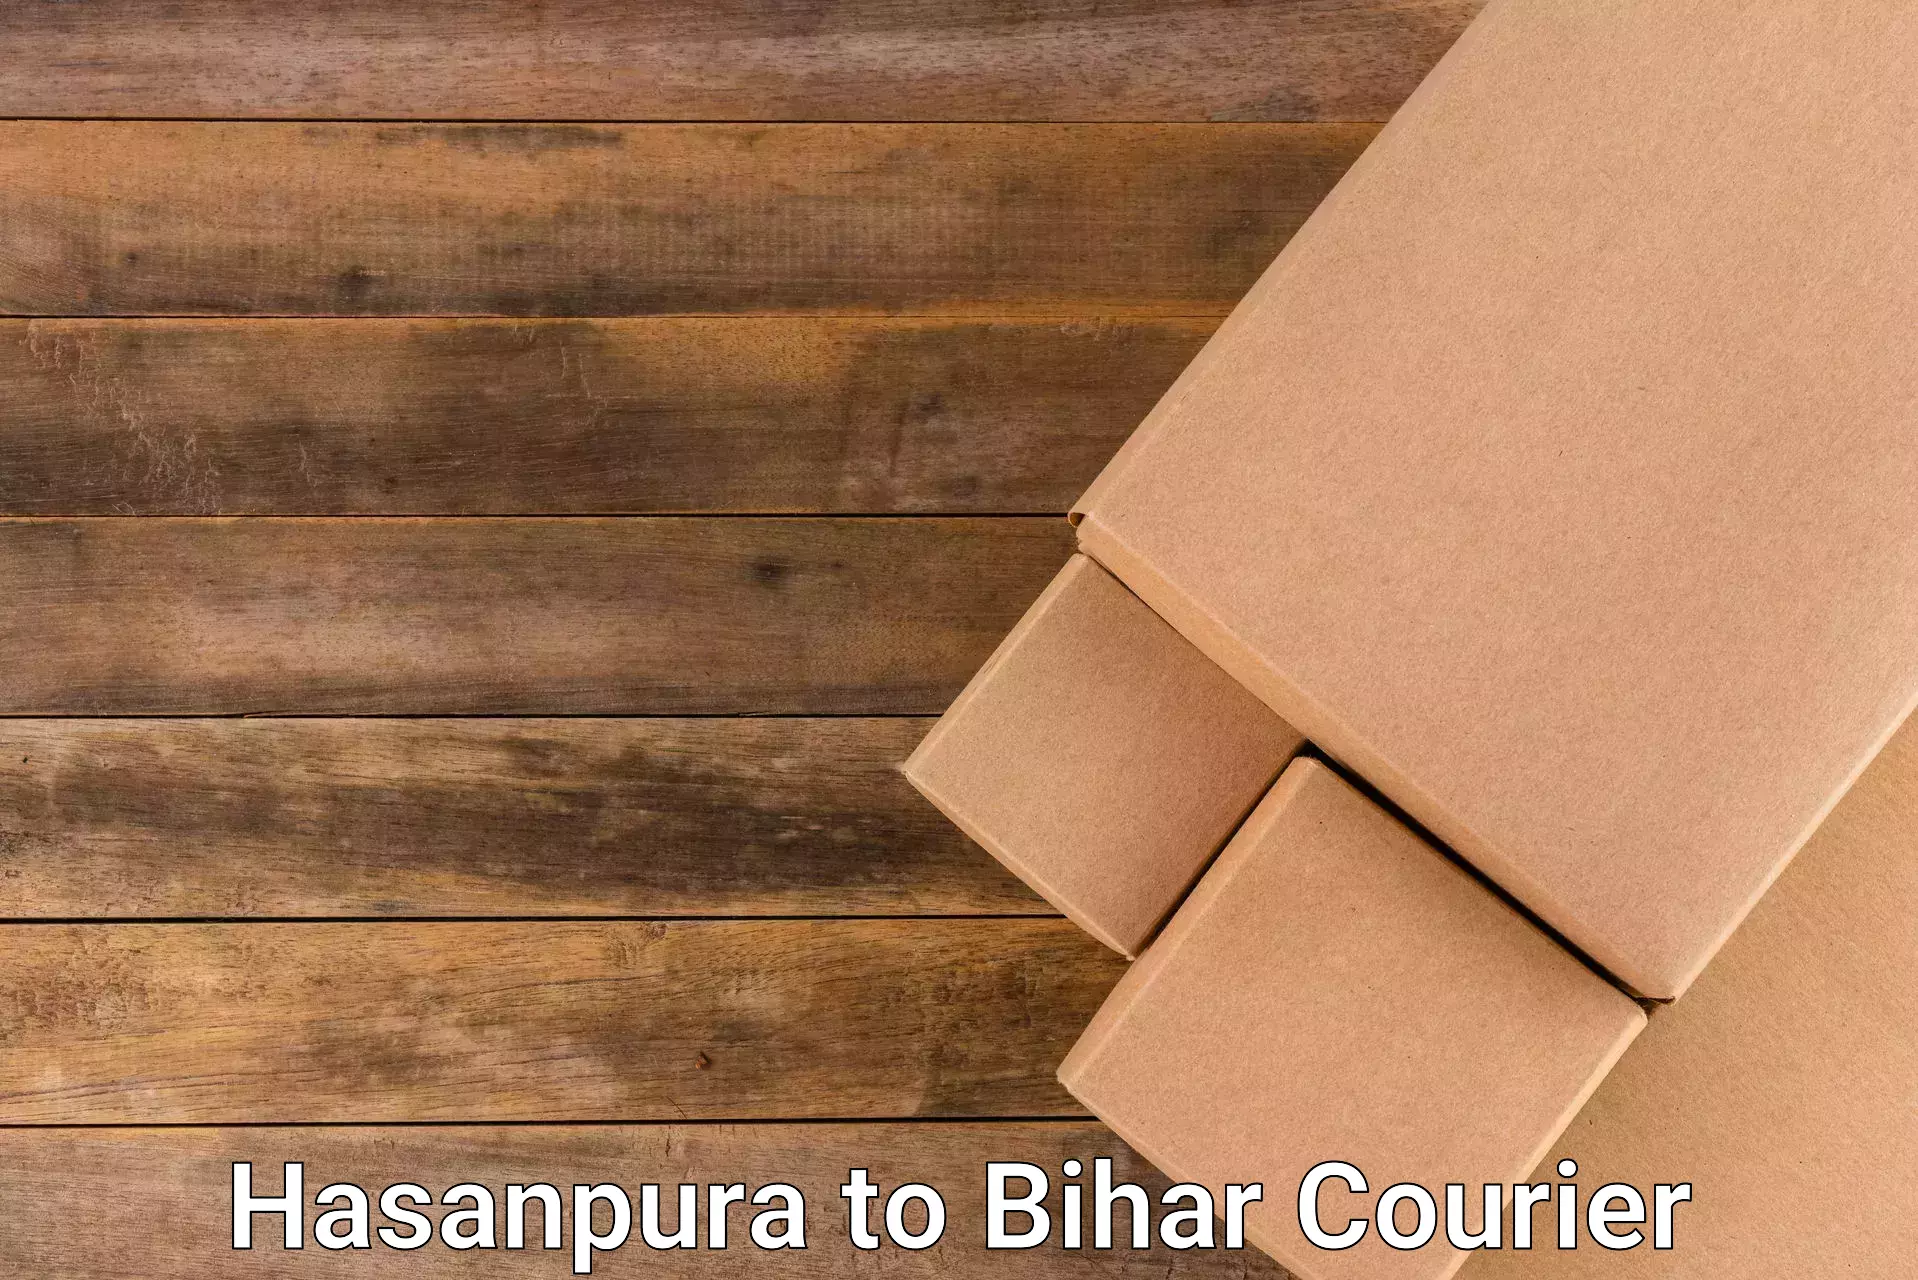 Next-day delivery options Hasanpura to Jagdishpur Bhojpur